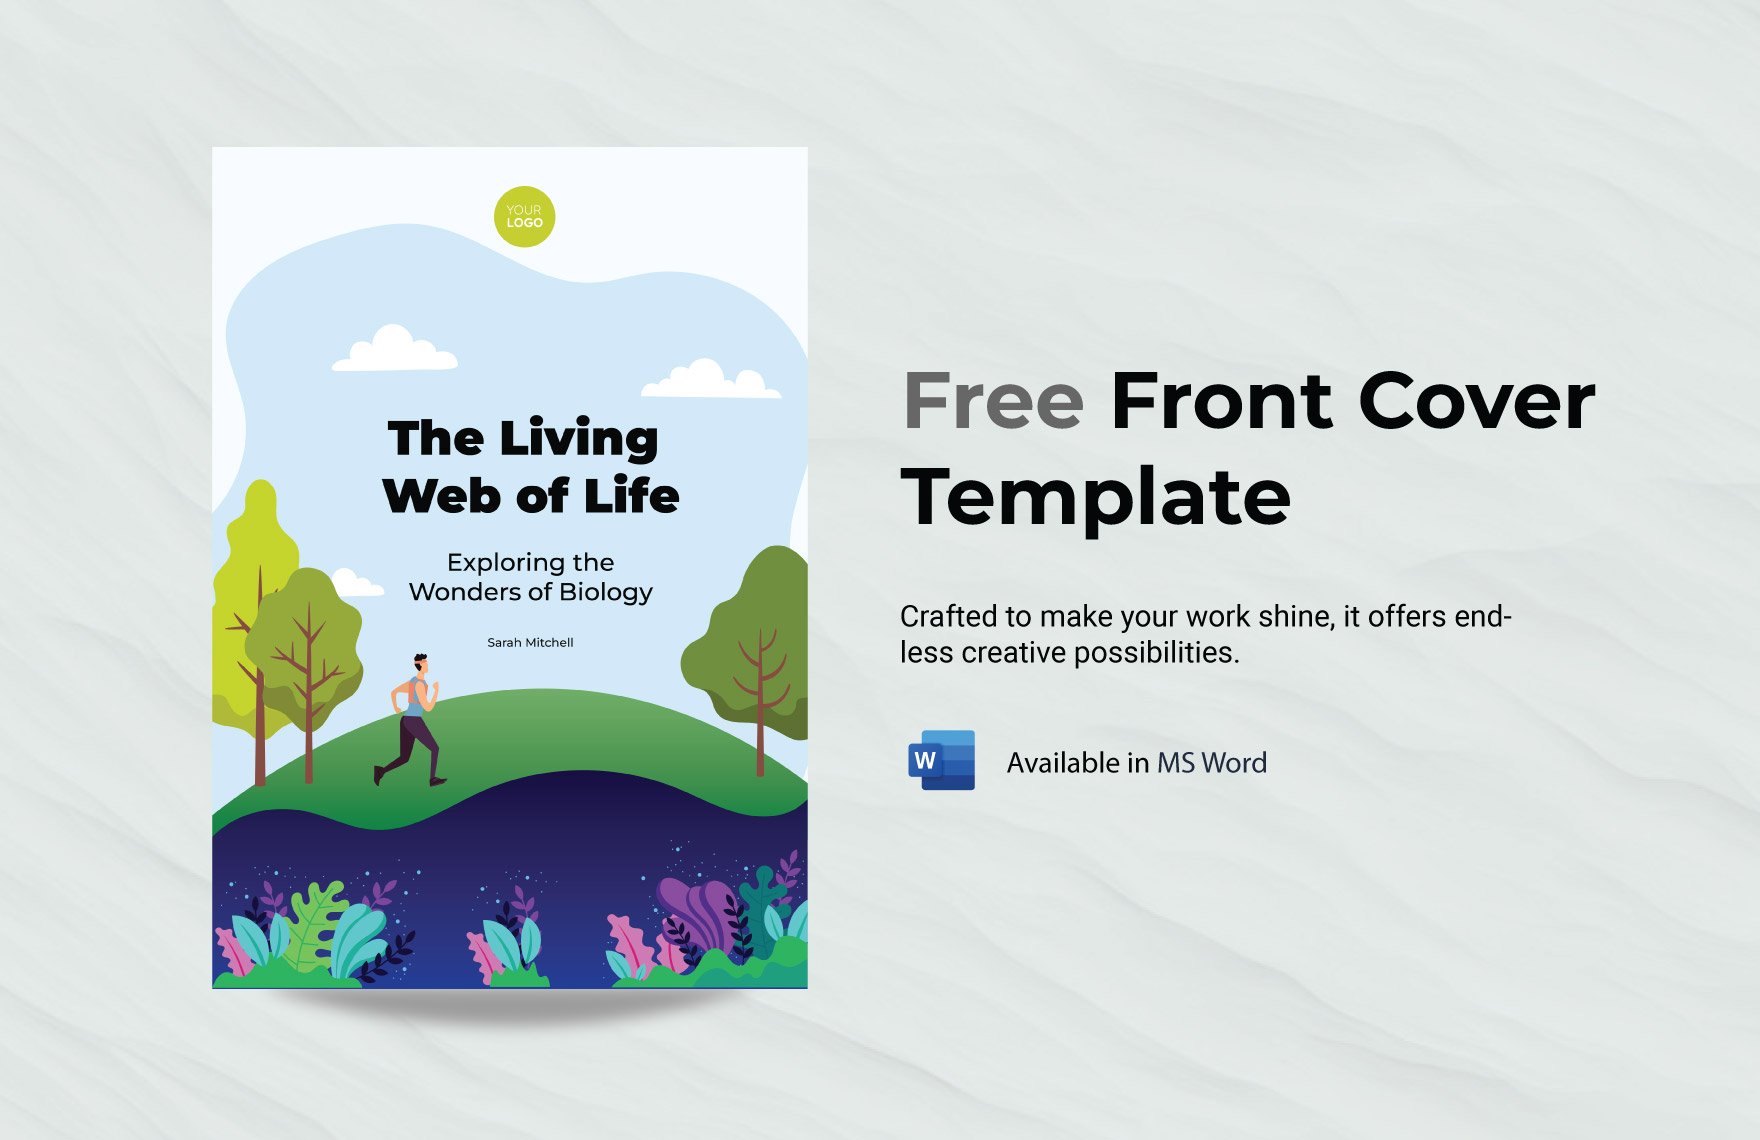 Free Front Cover Template